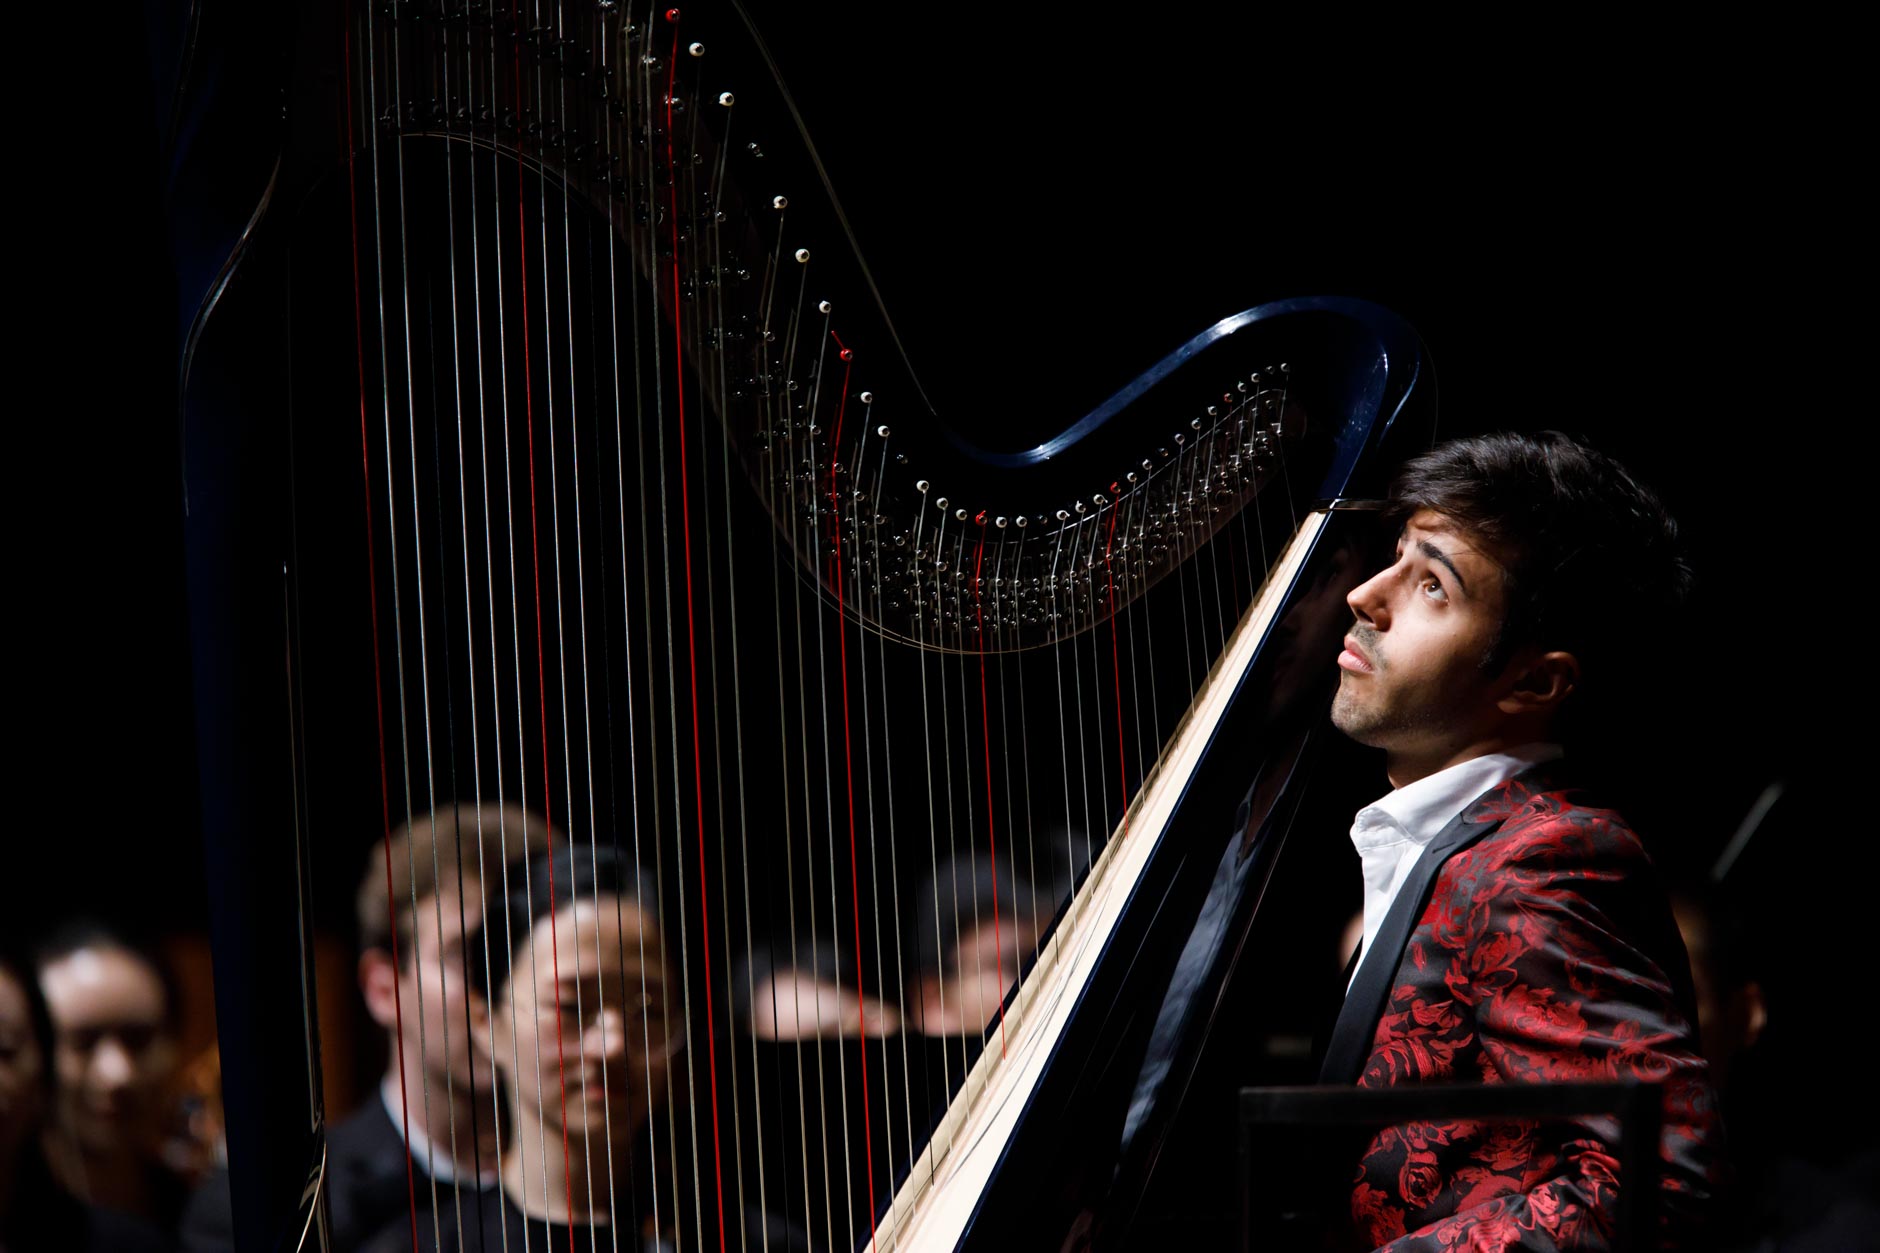 Valerio Lisci of Italy performs with the Indiana University Summer Philharmonic Orchestra during the Stage IV concert at the 11th USA International Harp Competition at Indiana University in Bloomington, Indiana on Saturday, July 13, 2019. (Photo by James Brosher)